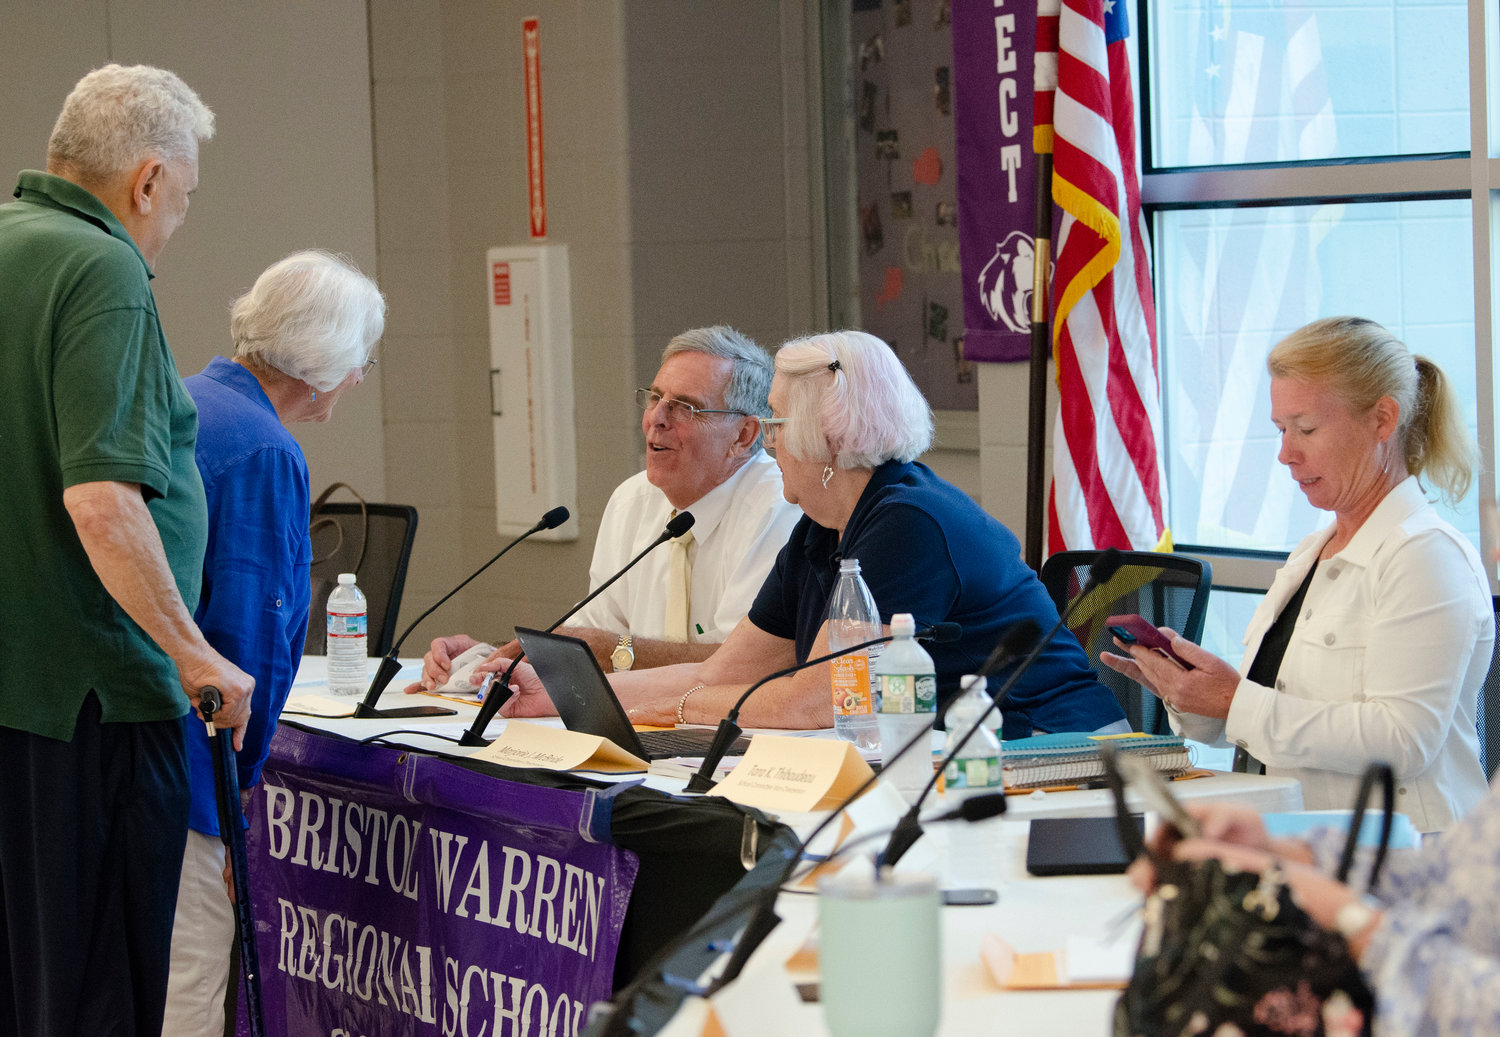 Residents speak to school committee members Victor Cabral (mid-left) and Marjorie McBride before the meeting on Monday night at Mt. Hope High School.  School committee member Tara Thibaudeau is right.